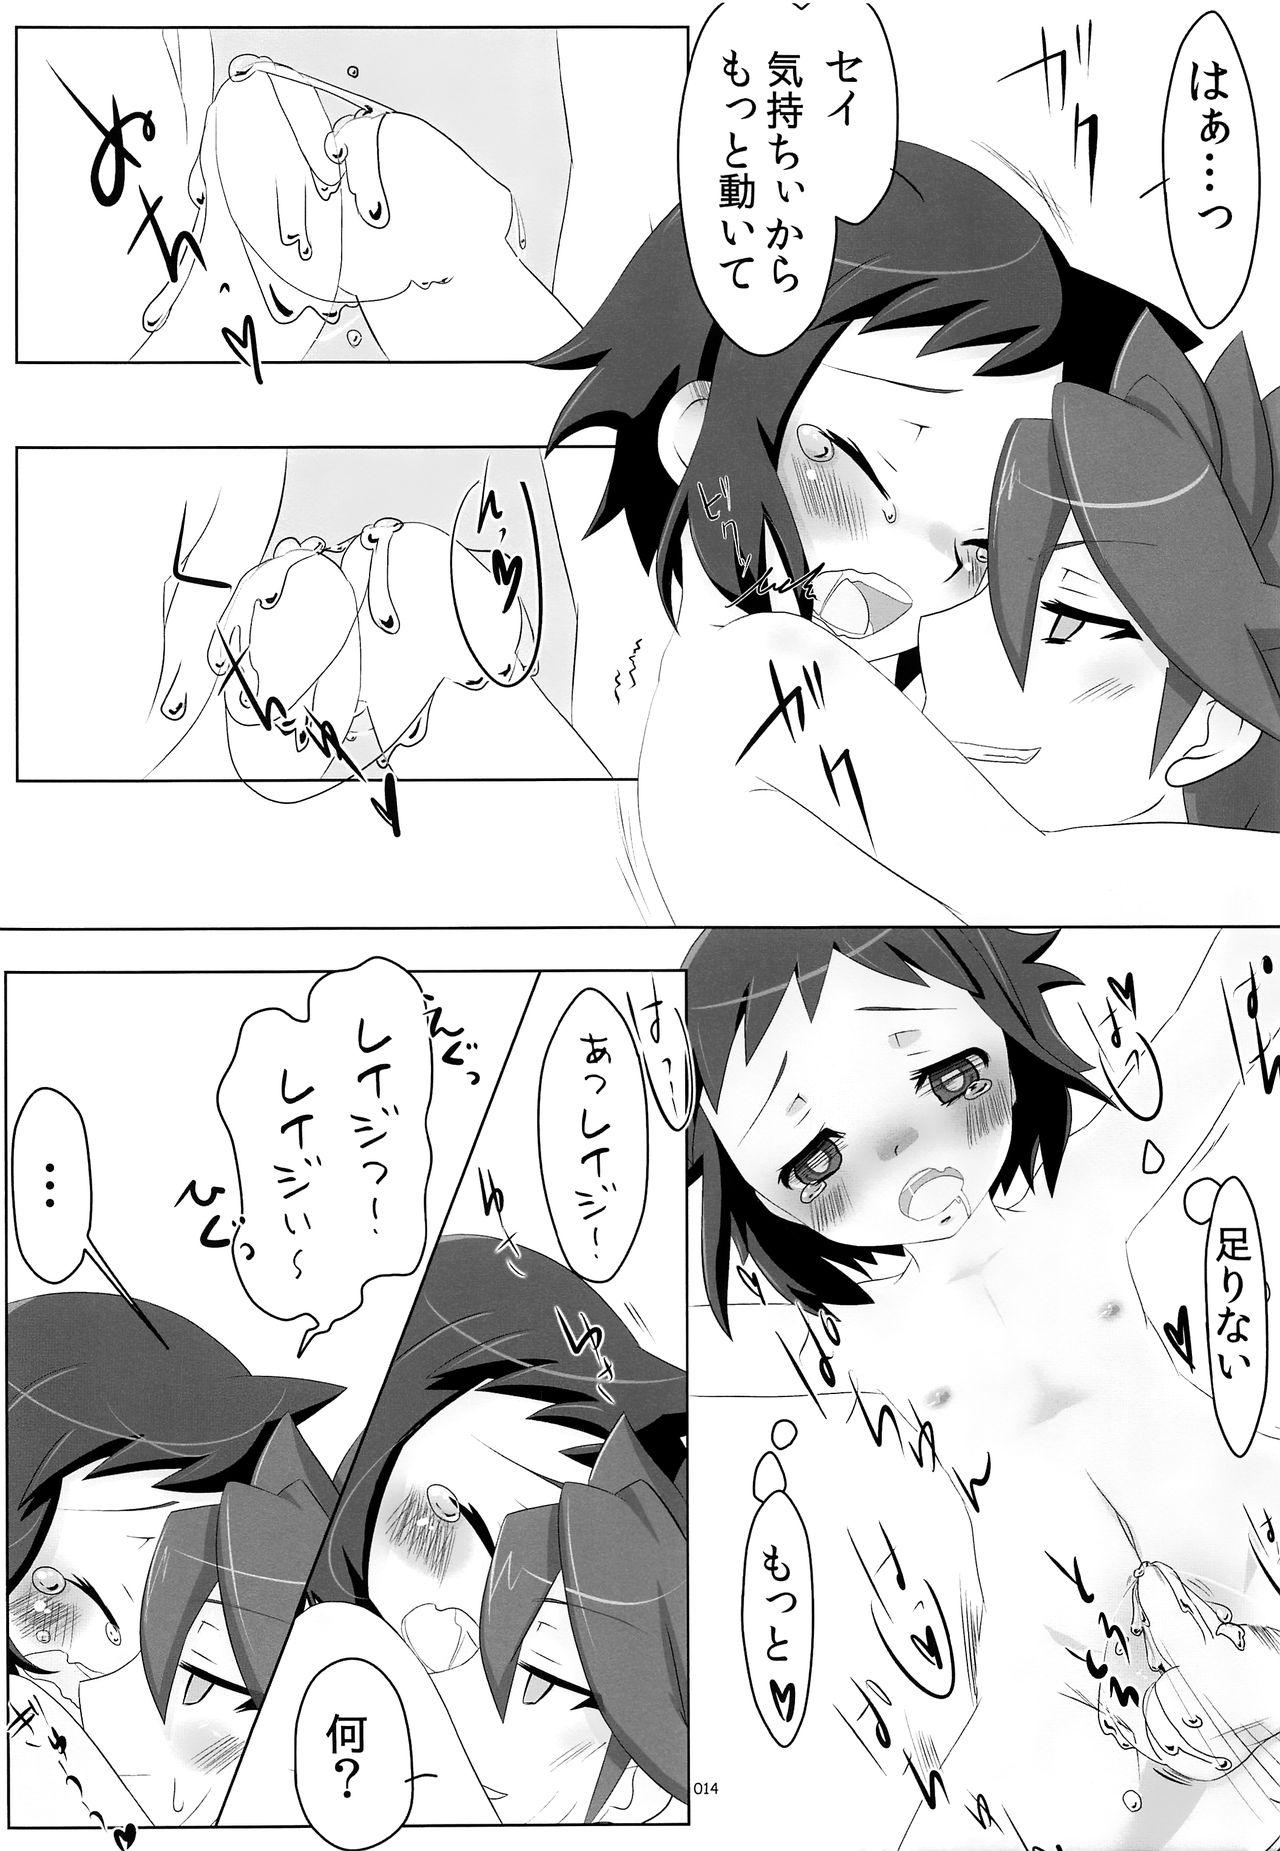 Mulher Issho ni Hairo. - Gundam build fighters Slave - Page 13